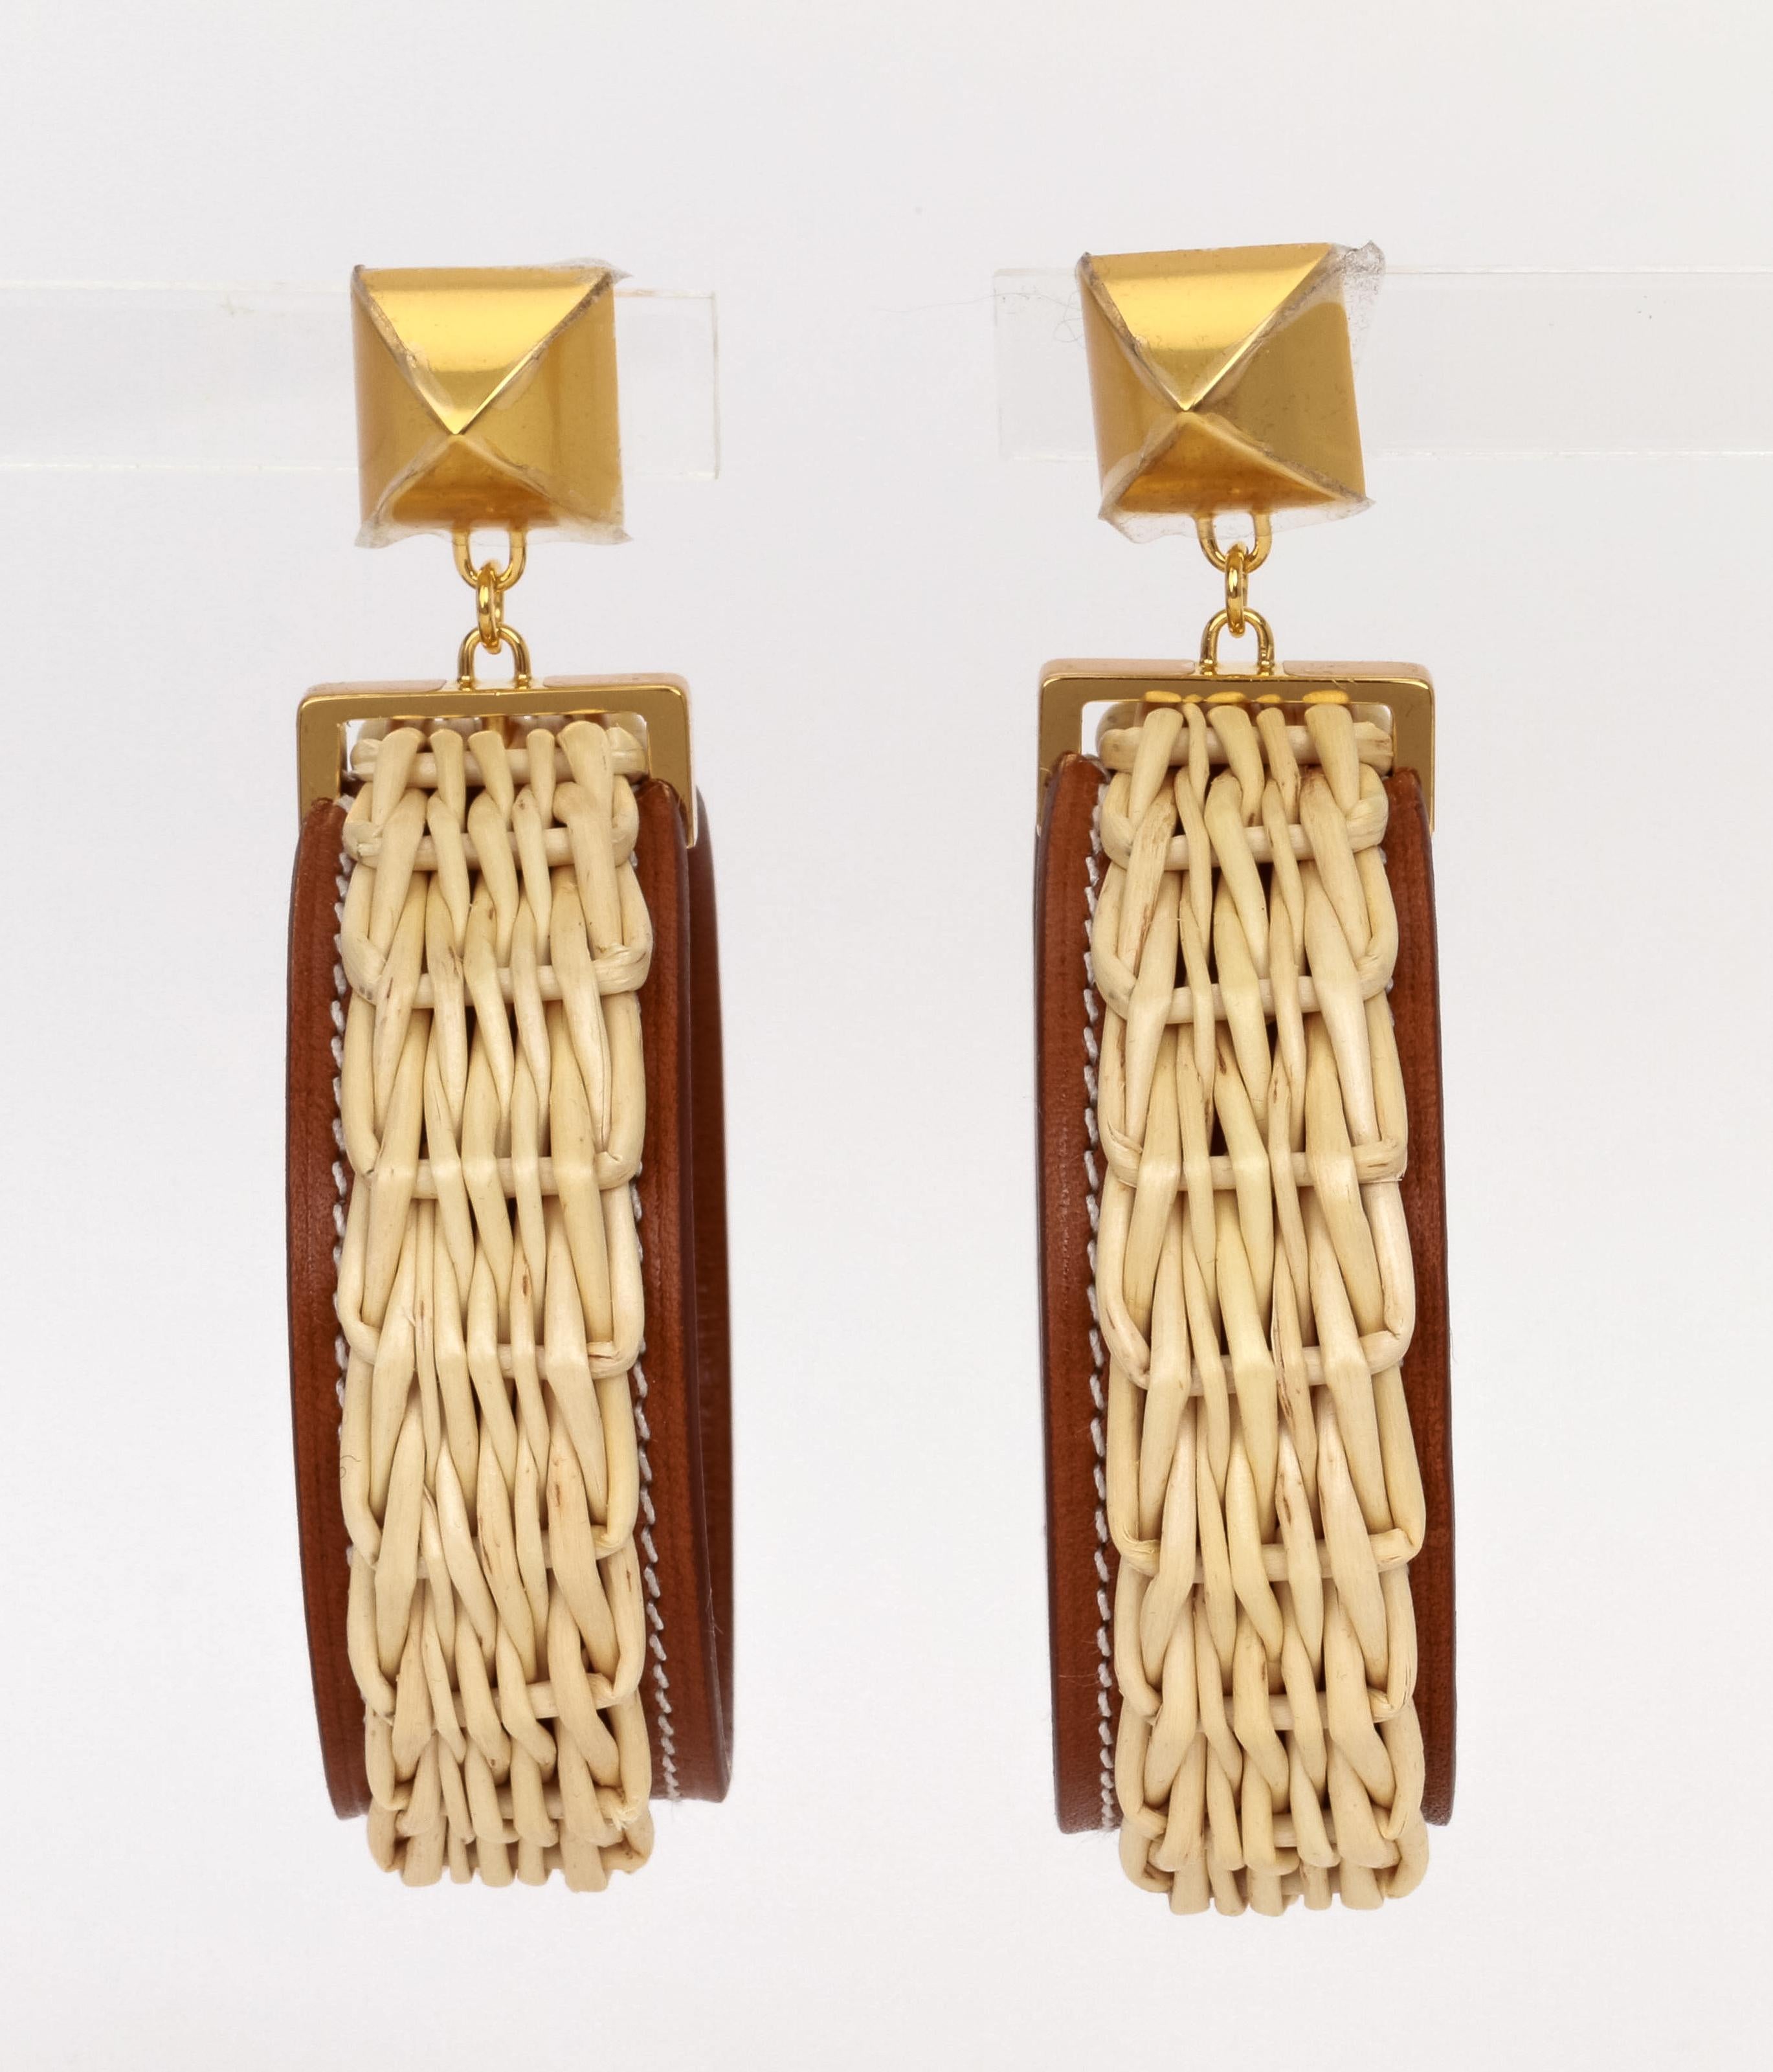 HERMES Wicker Swift Medor Picnic Earrings. These stunning earrings are crafted of brown leather and whicker. Comes with original box and velvet pouch. Brand new in unused condition 